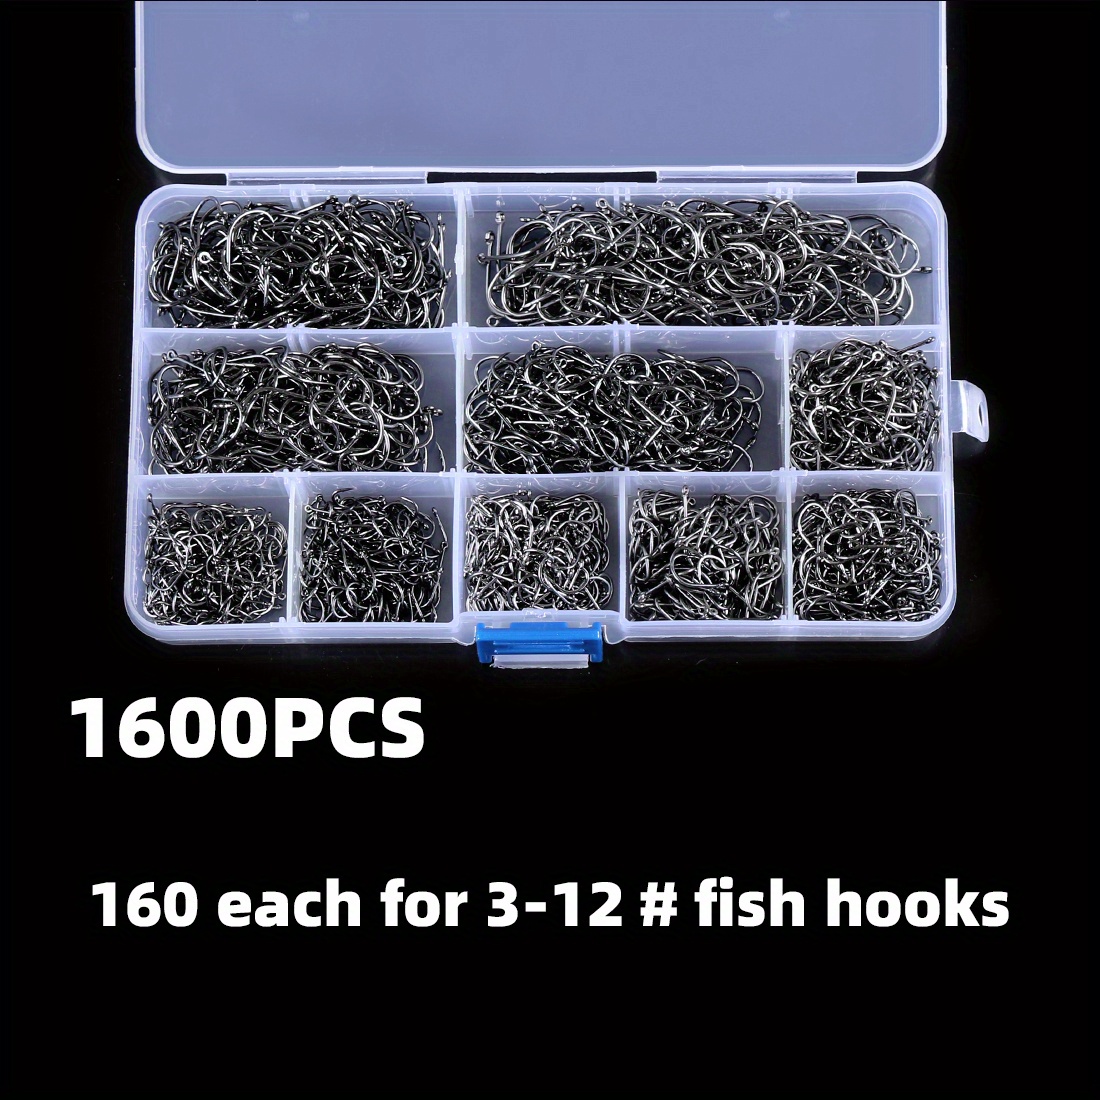 1500Pcs Mixed Size 3-12 High Caon Steel Carp Fishing Hooks Pack with Hole  with Retail Box Jigg Bait